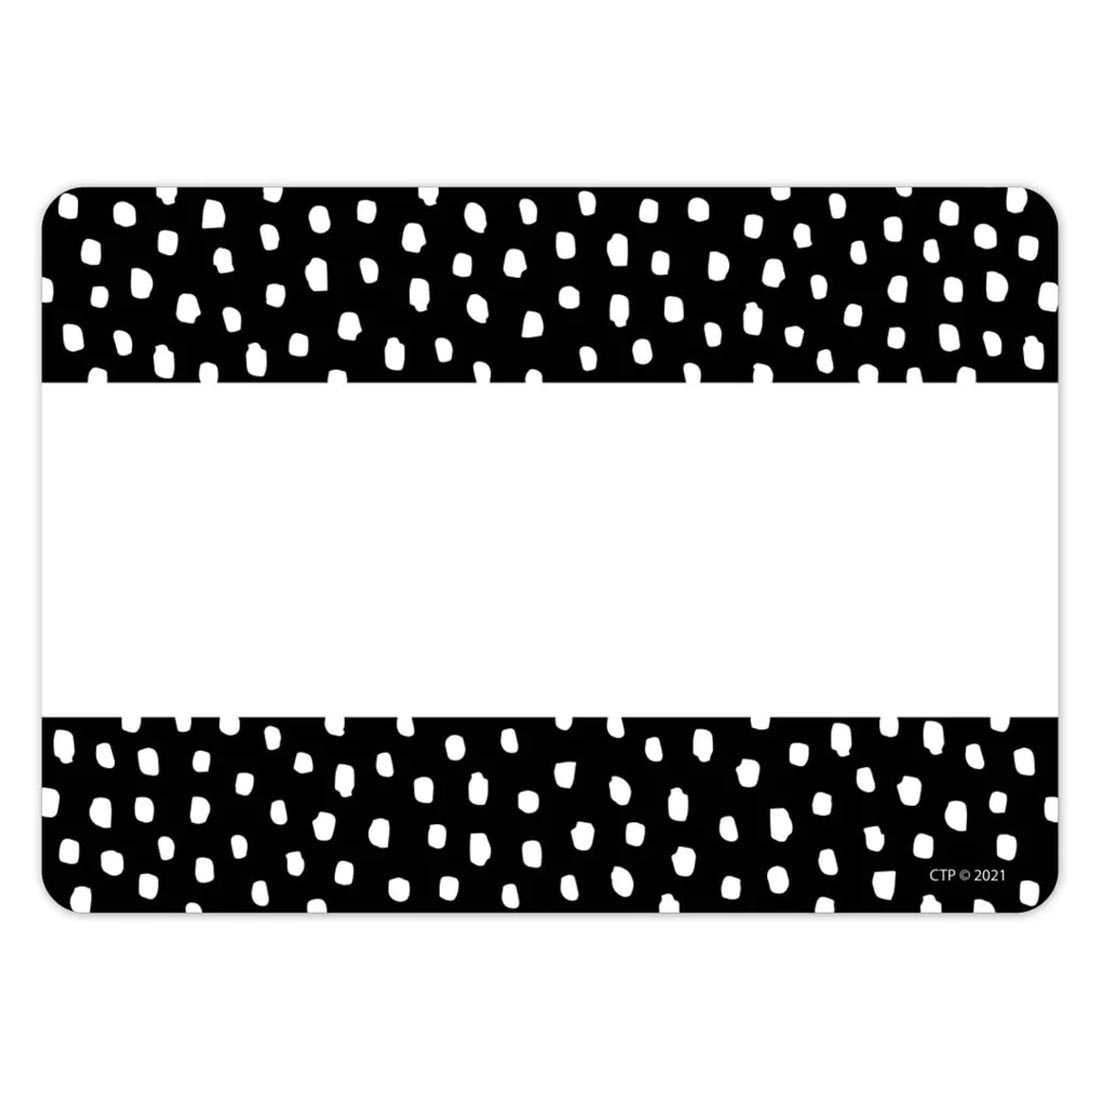 Core Decor Messy Dots on Black Name Tag/Label by Creative Teaching Press